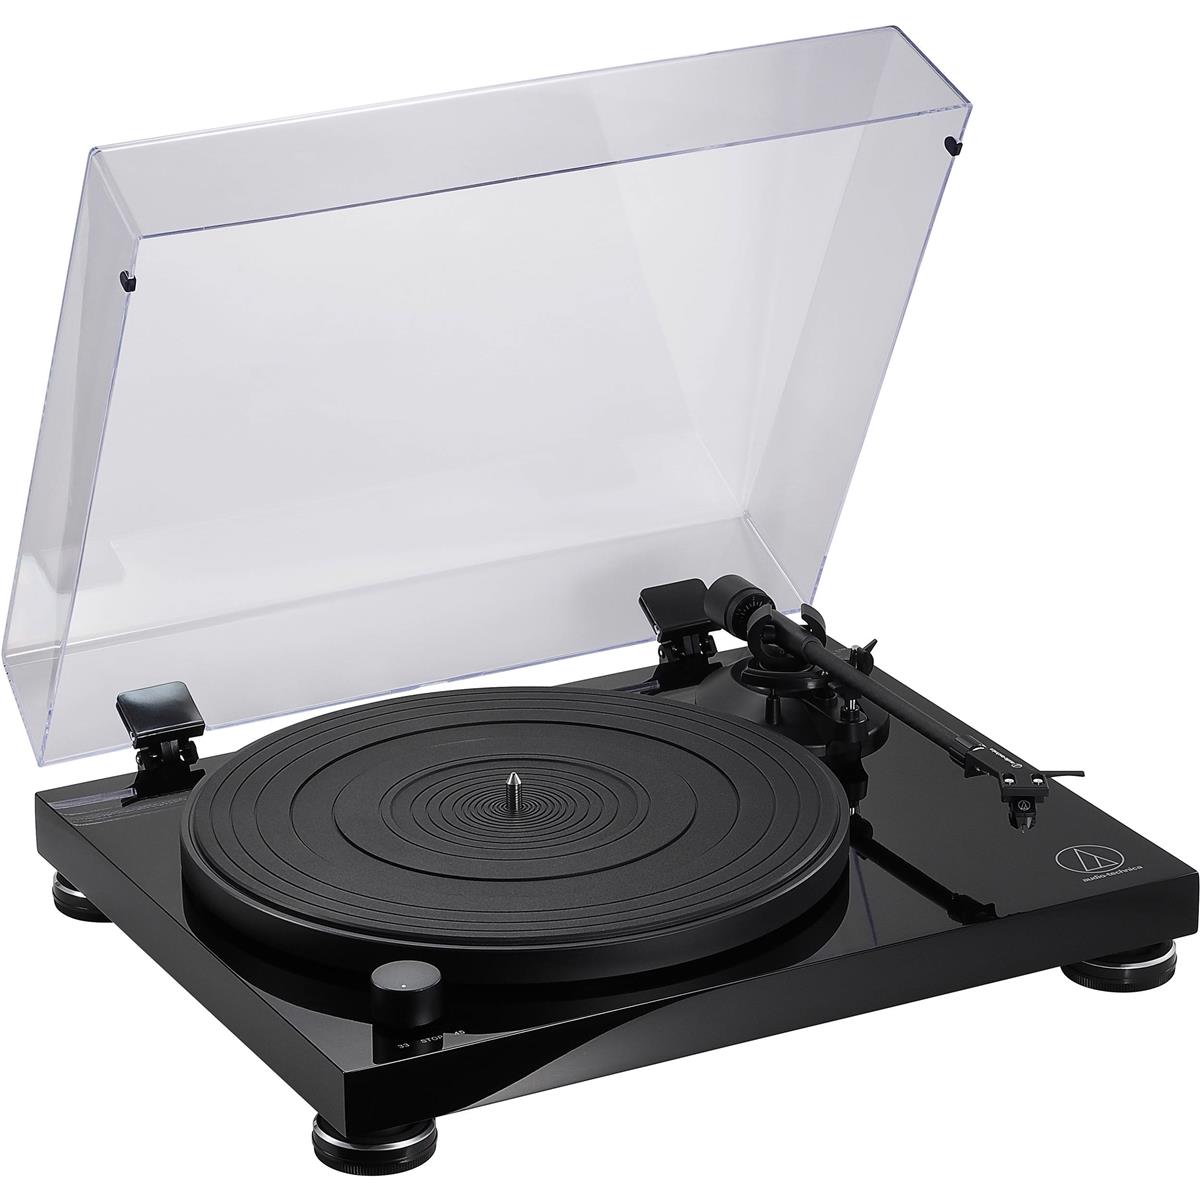 Image of Audio-Technica AT-LPW50PB Fully Manual Belt-Drive Two-Speed Stereo Turntable